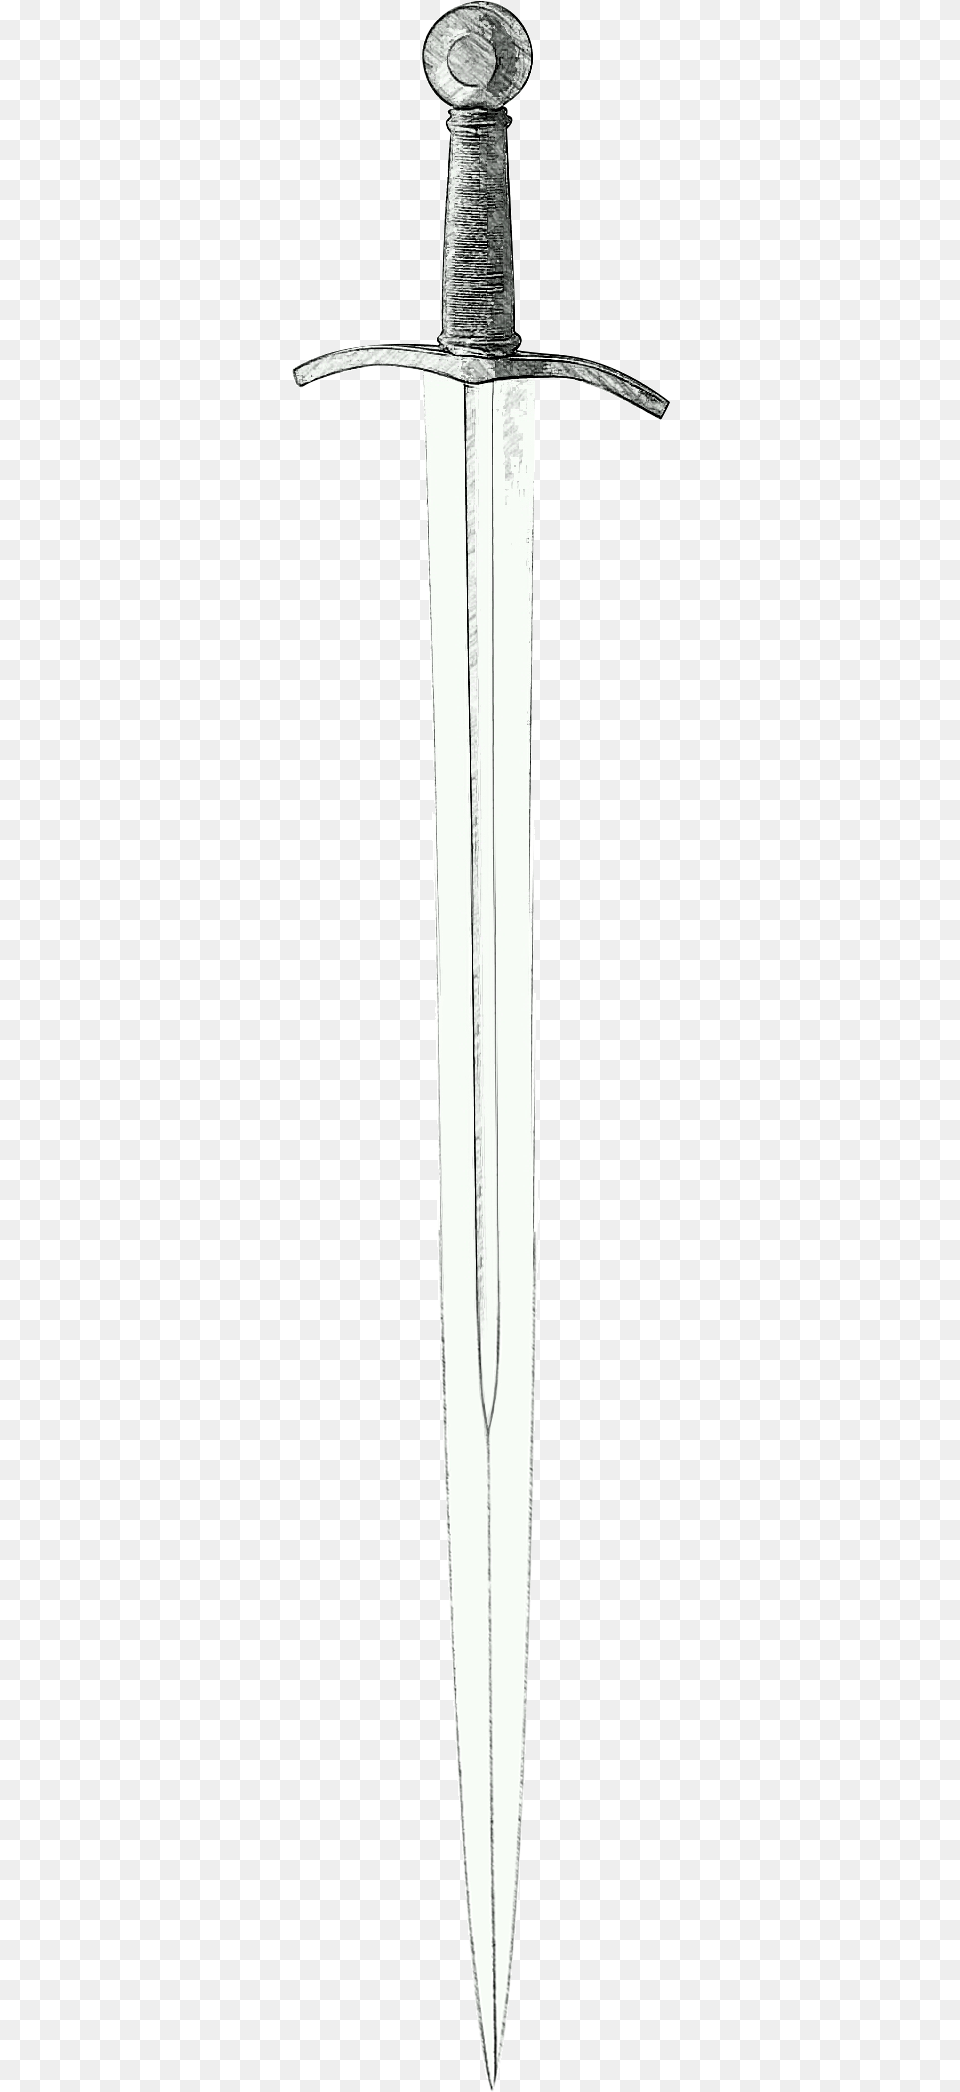 The Squire Sword Darkness, Blade, Dagger, Knife, Weapon Png